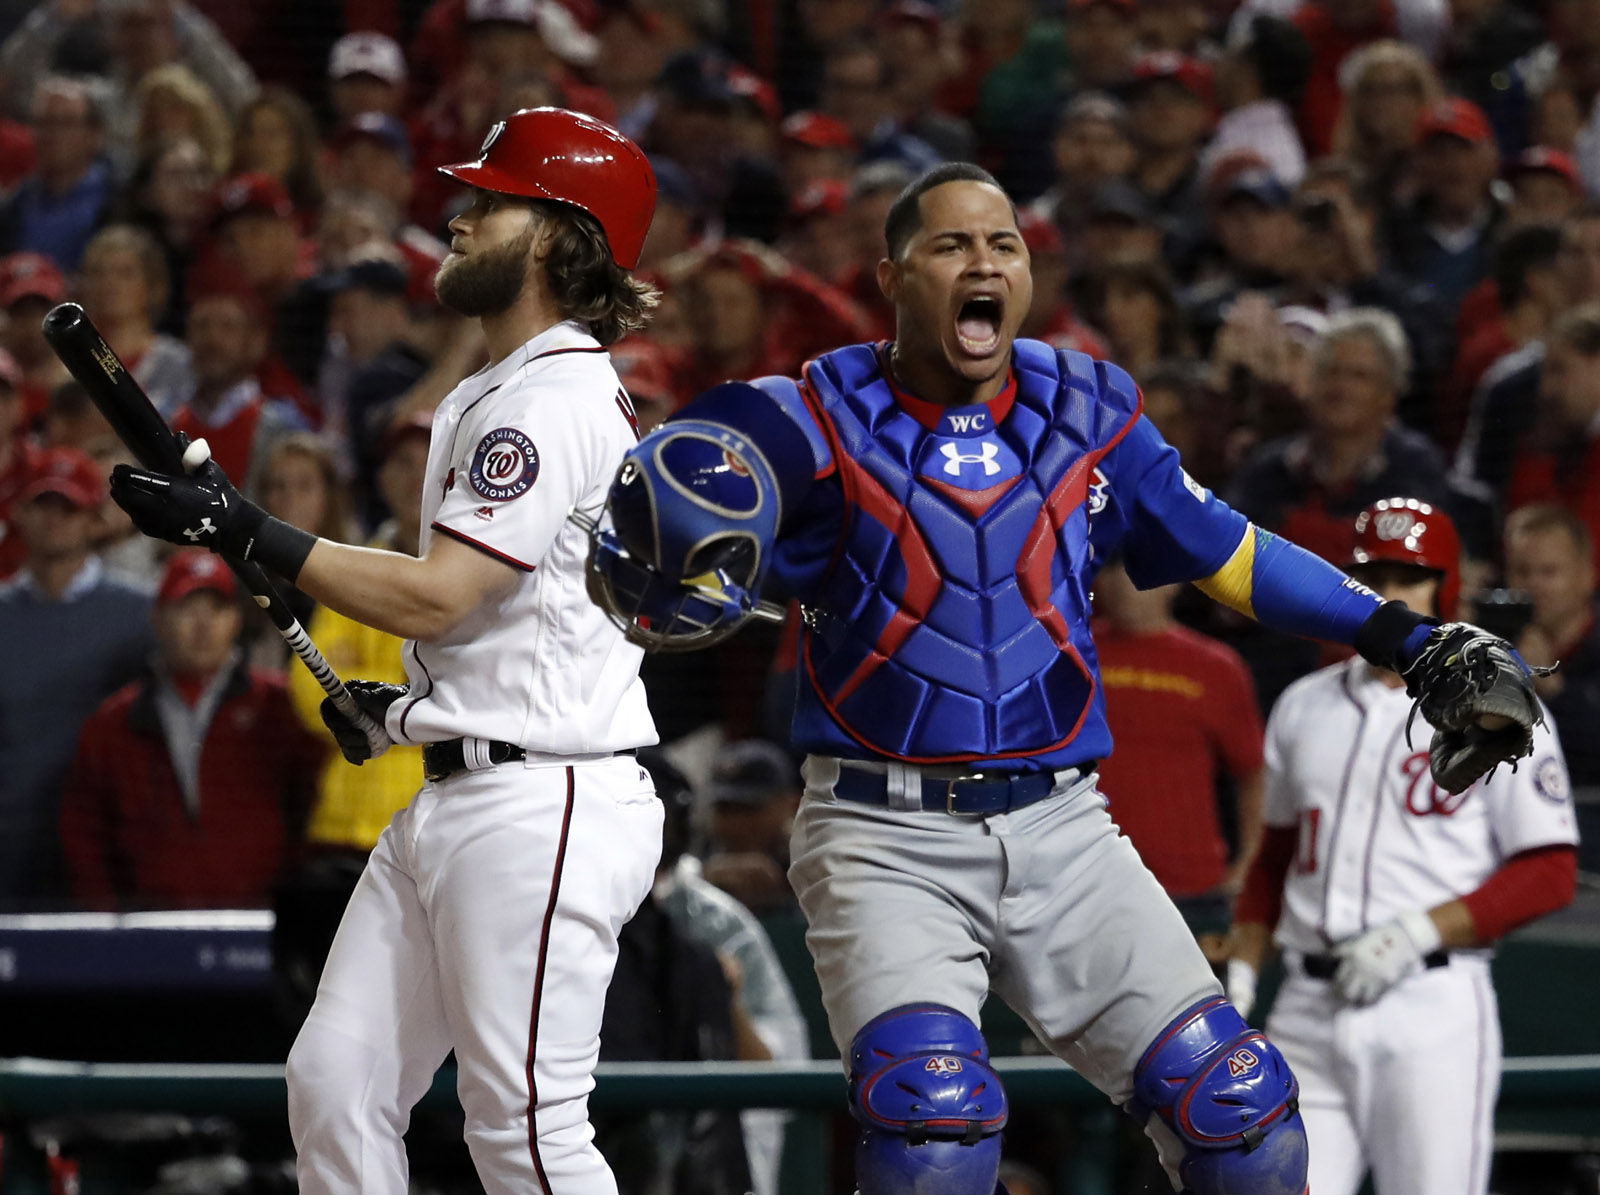 Chicago Cubs catcher Willson Contreras (40) reacts after Washington Nationals' Bryce Harper struck out for the final out as the Cubs beat the Washington Nationals 9-8 to to win baseball's National League Division Series, at Nationals Park, early Friday, Oct. 13, 2017, in Washington. (AP Photo/Pablo Martinez Monsivais)